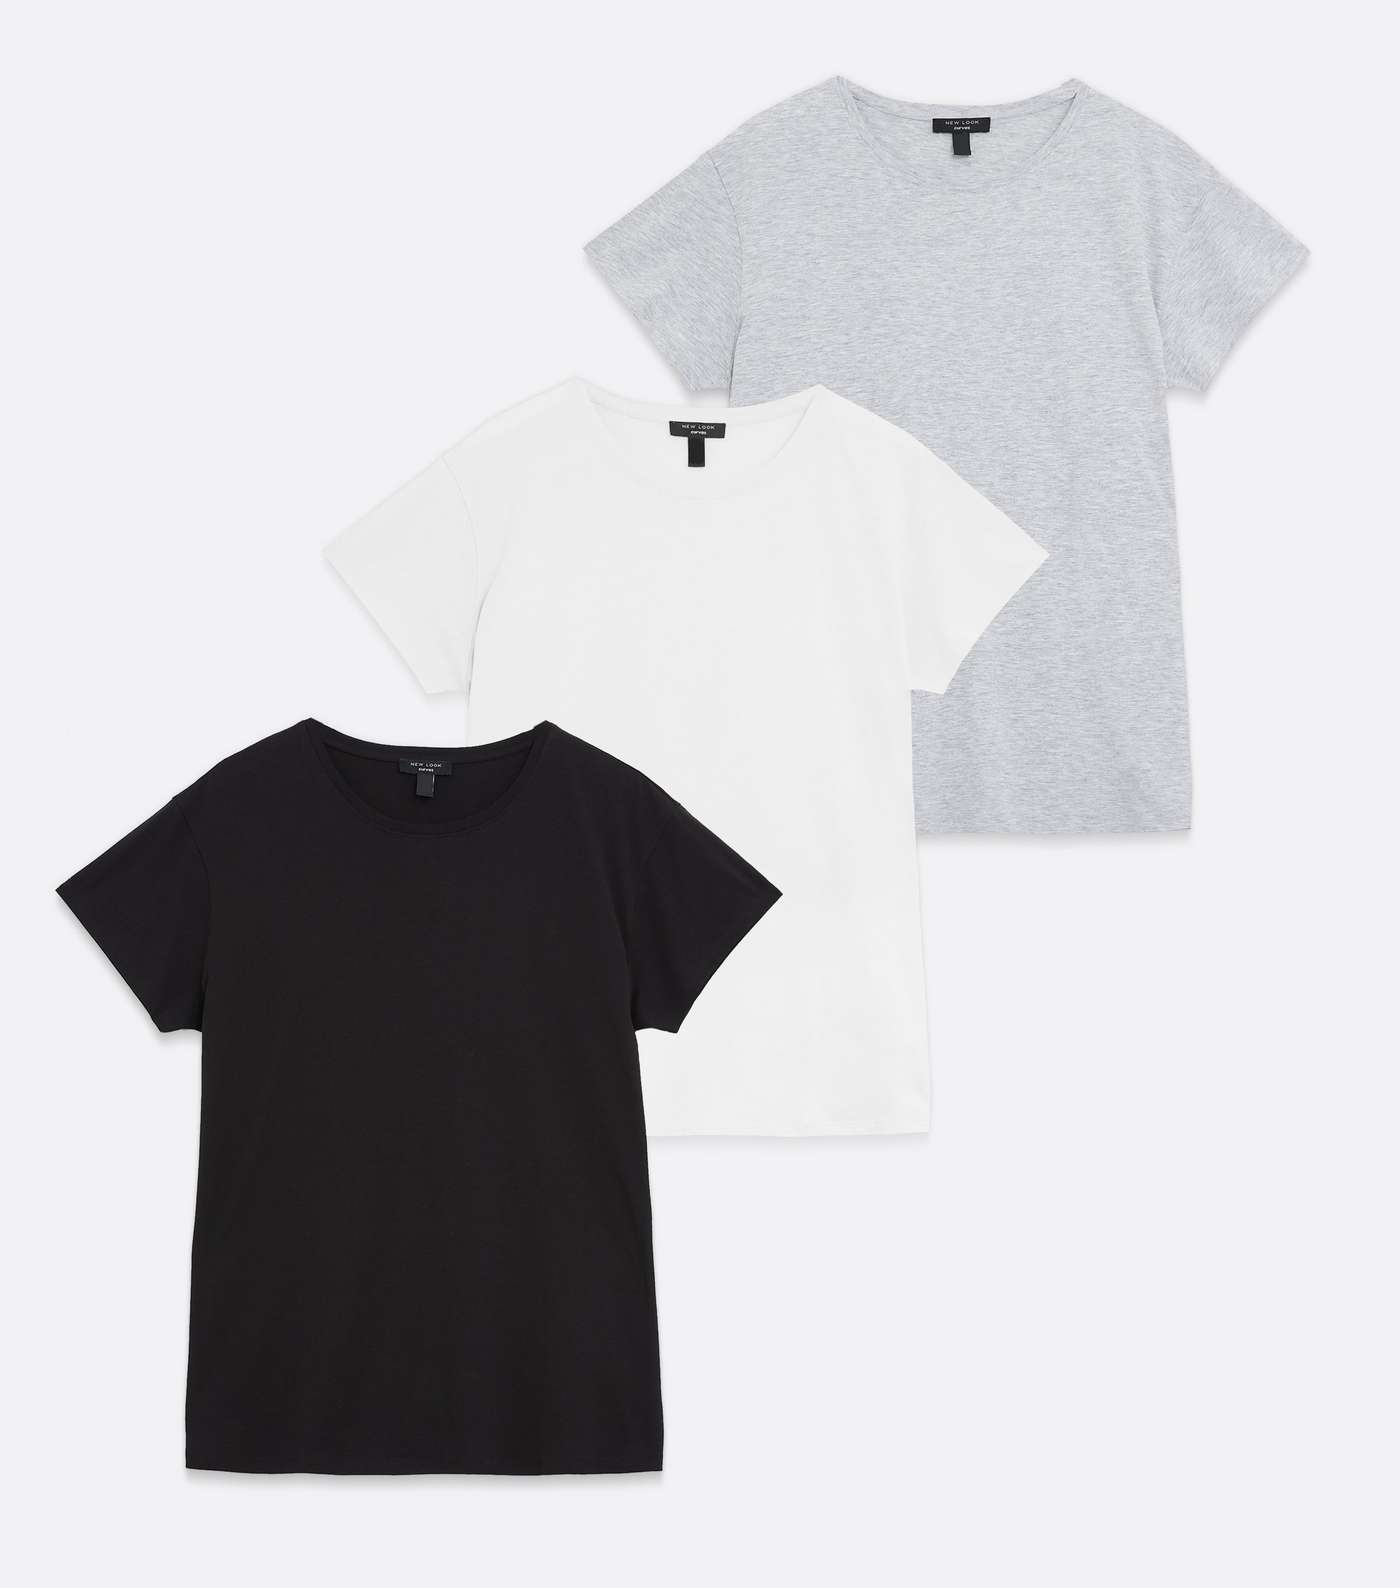 Curves 3 Pack Grey Black and White Crew Neck T-Shirts Image 5